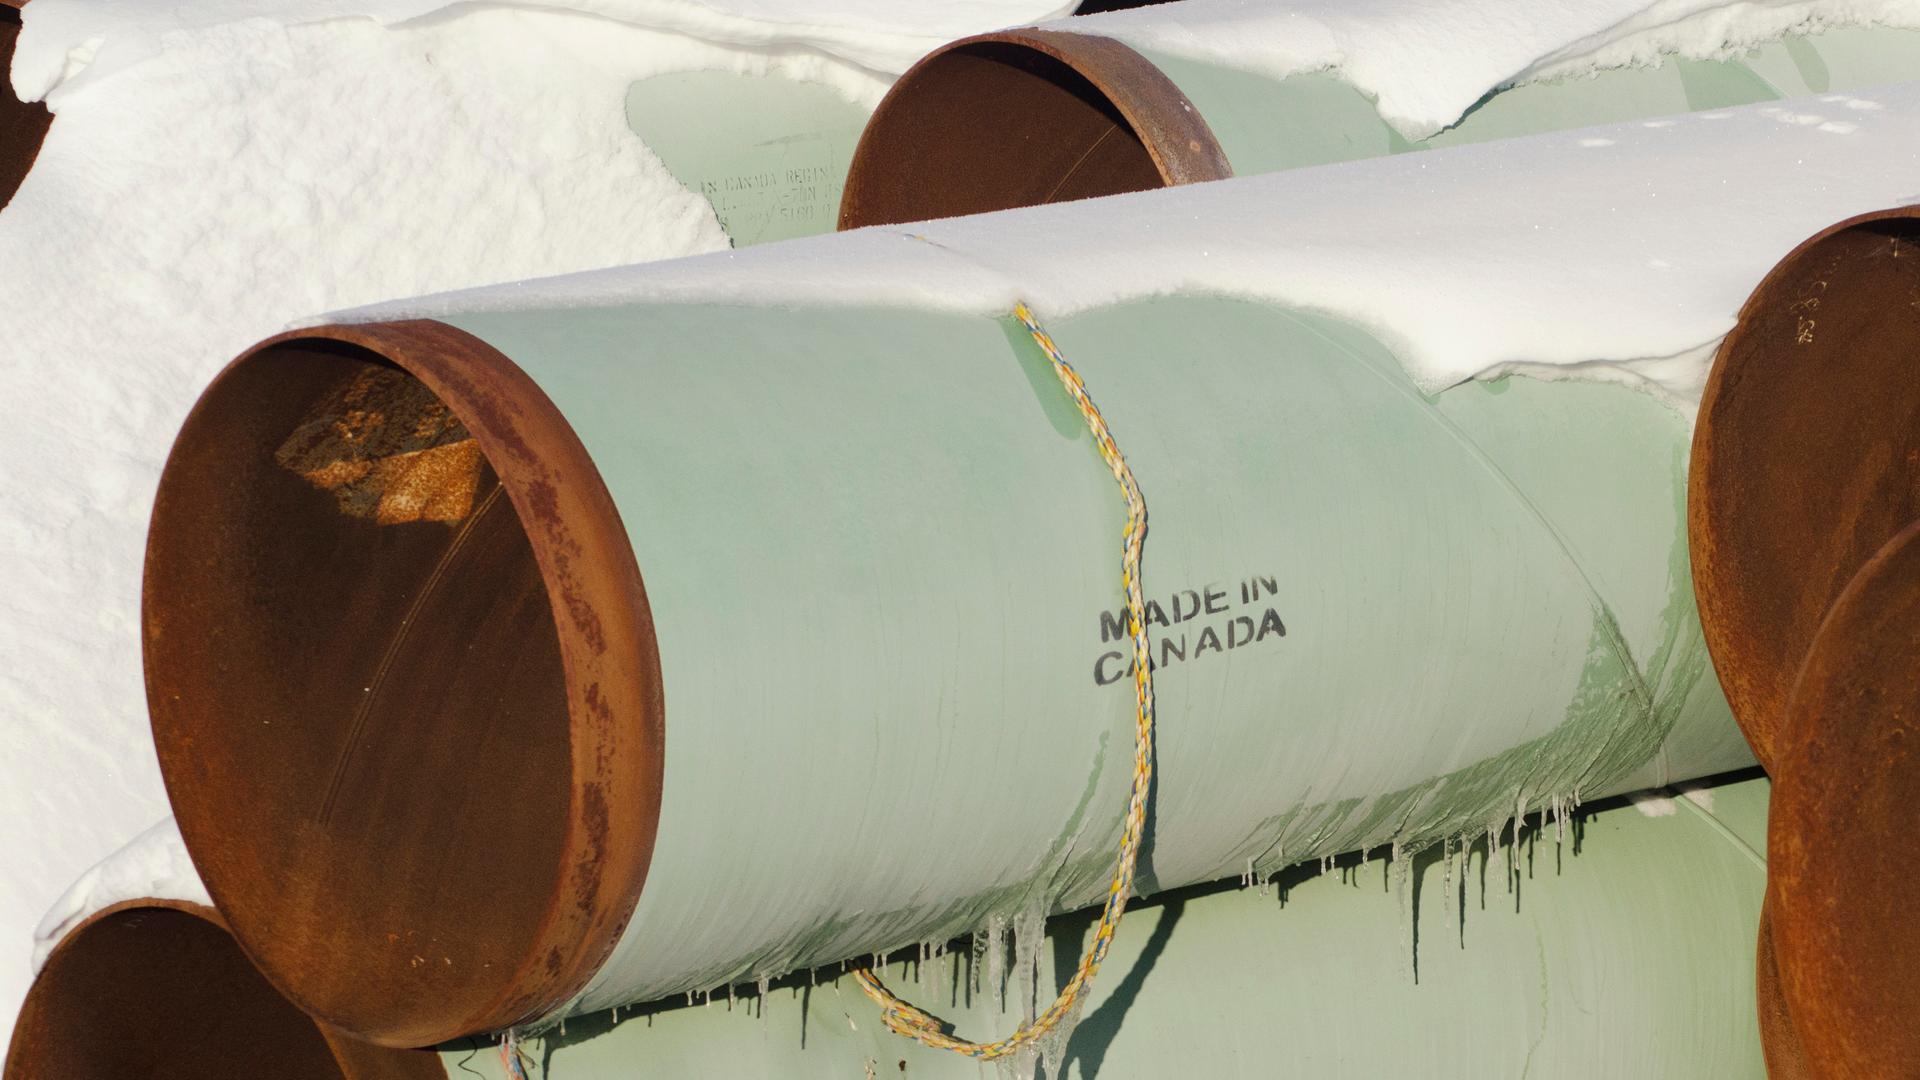 Both outgoing Canadian prime minister Steven Harper and his newly-elected successor Justin Trudeau hope these sections of pipe will eventually get put into place as part of the planned Keystone XL oil pipeline from Alberta to Texas. But politics and econo